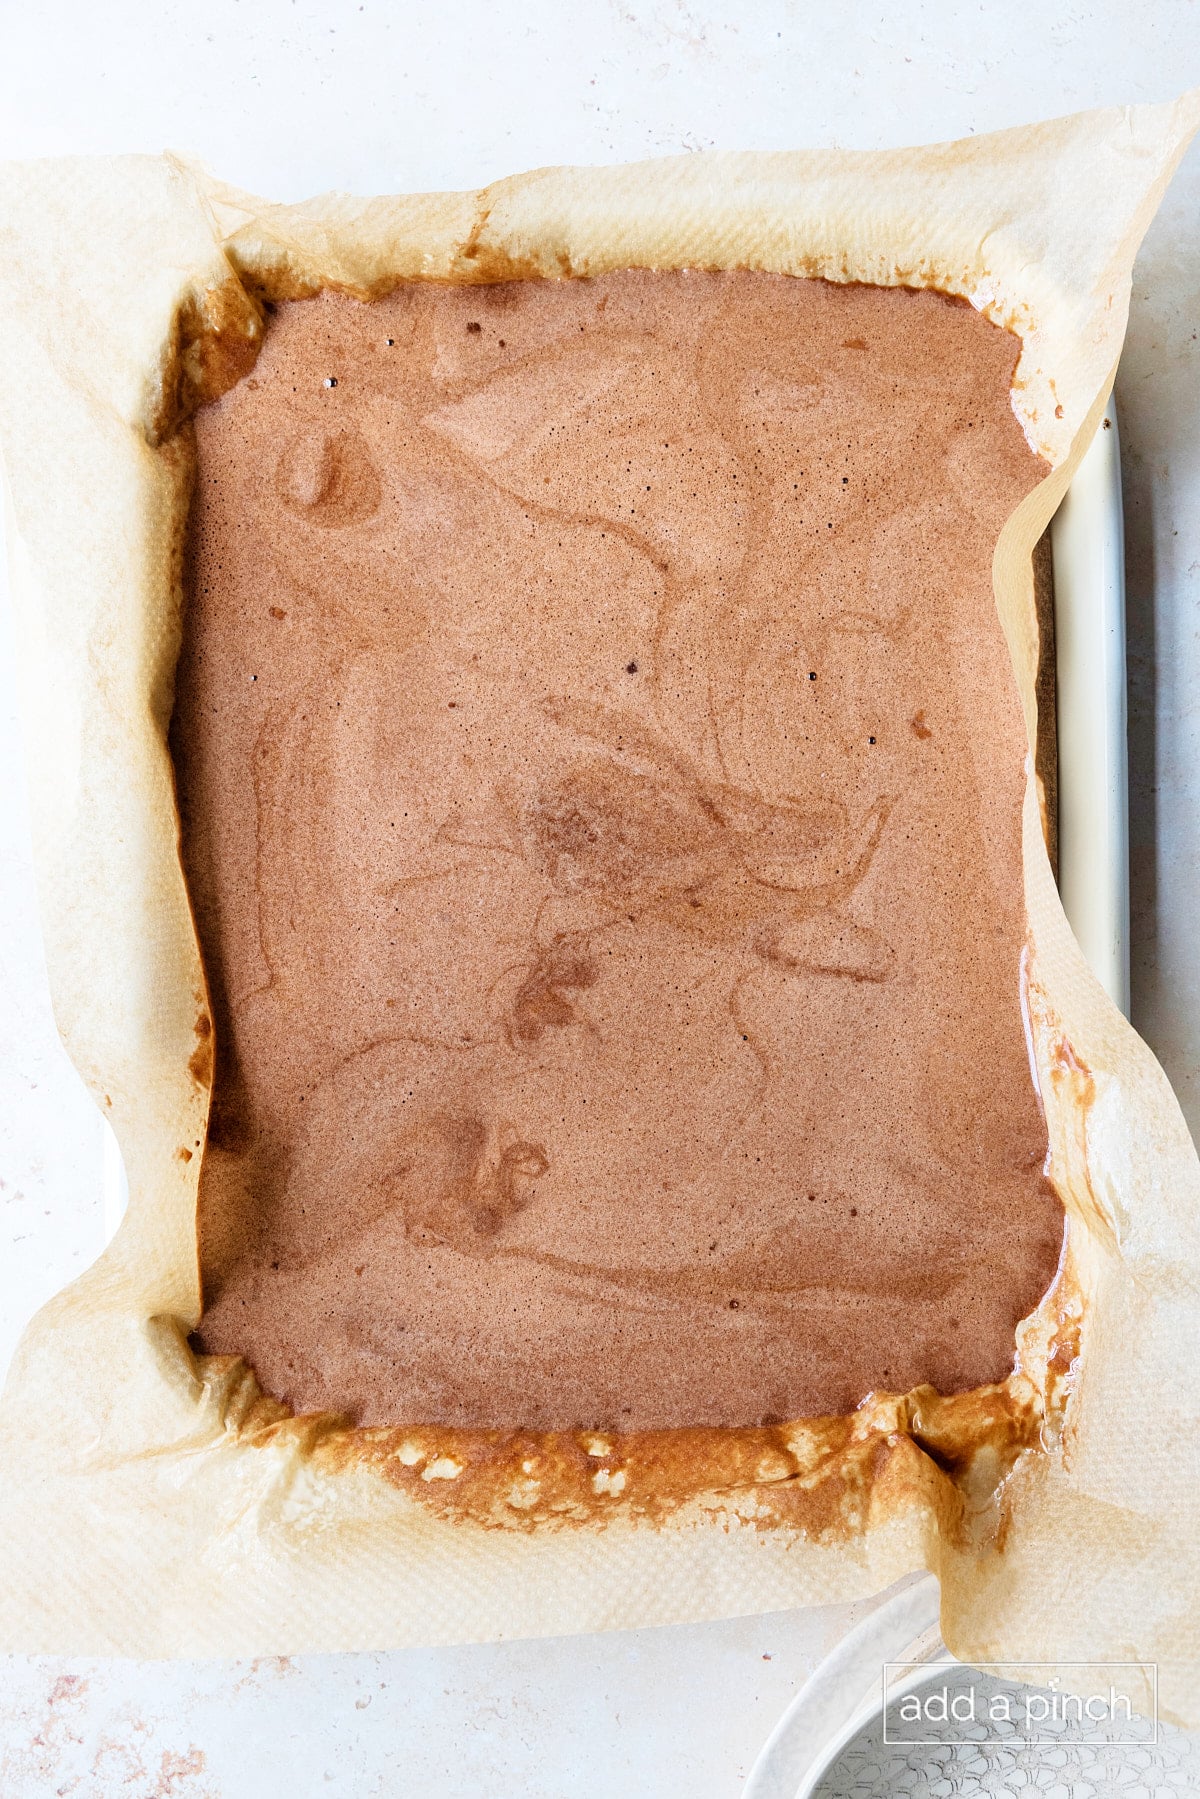 Cake batter poured into a parchment lined baking sheet.